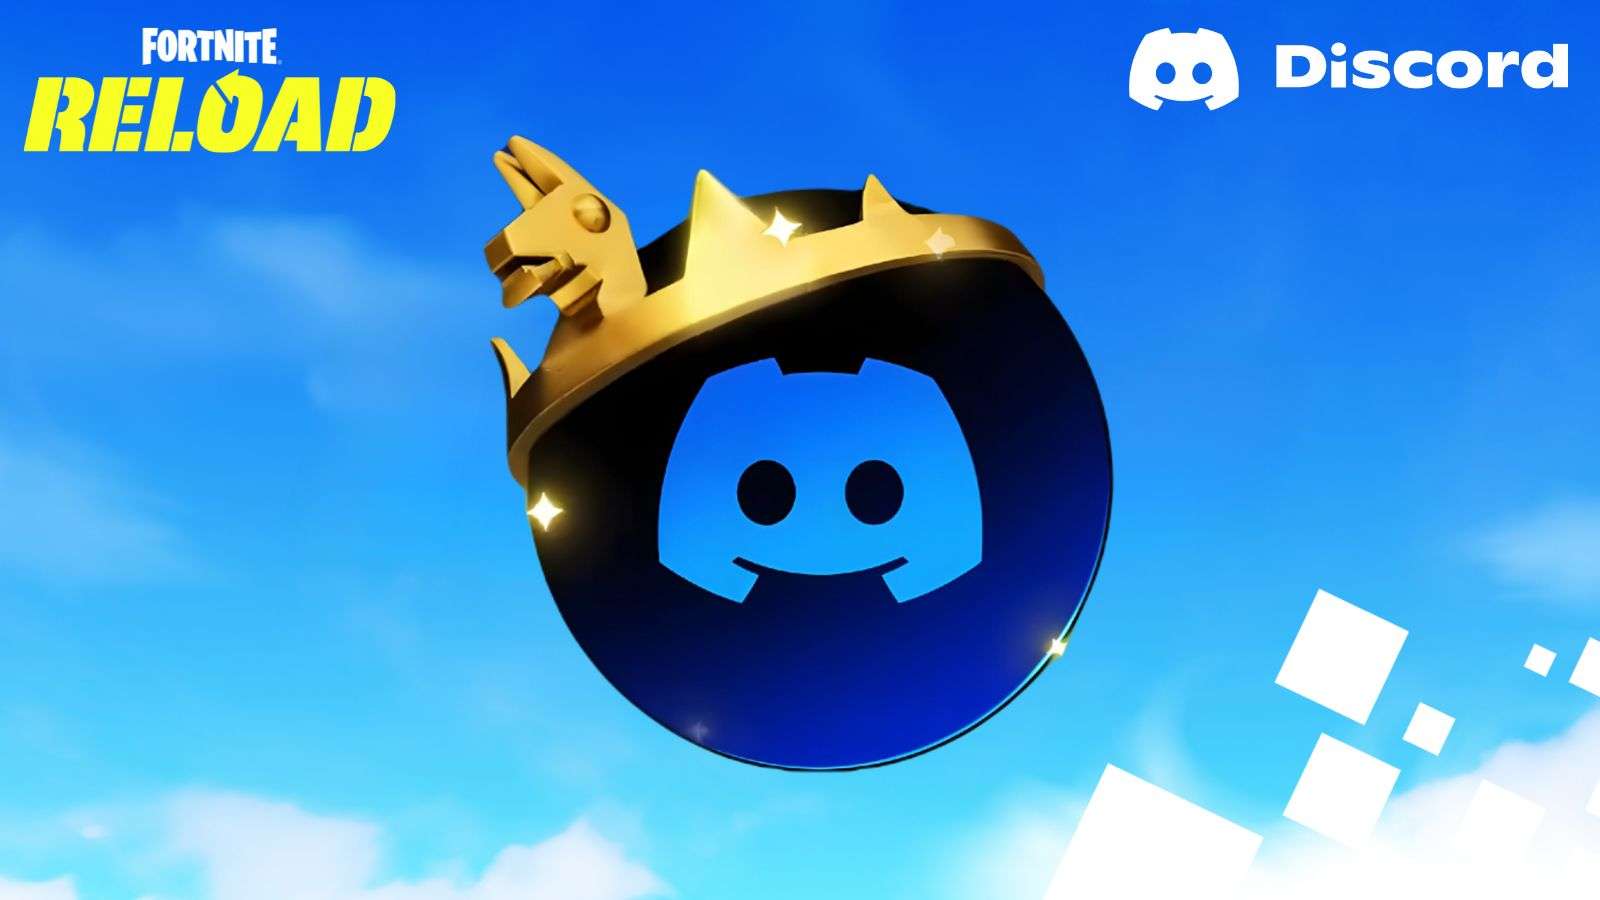 Fortnite Victory Crown Avatar Decoration on Discord